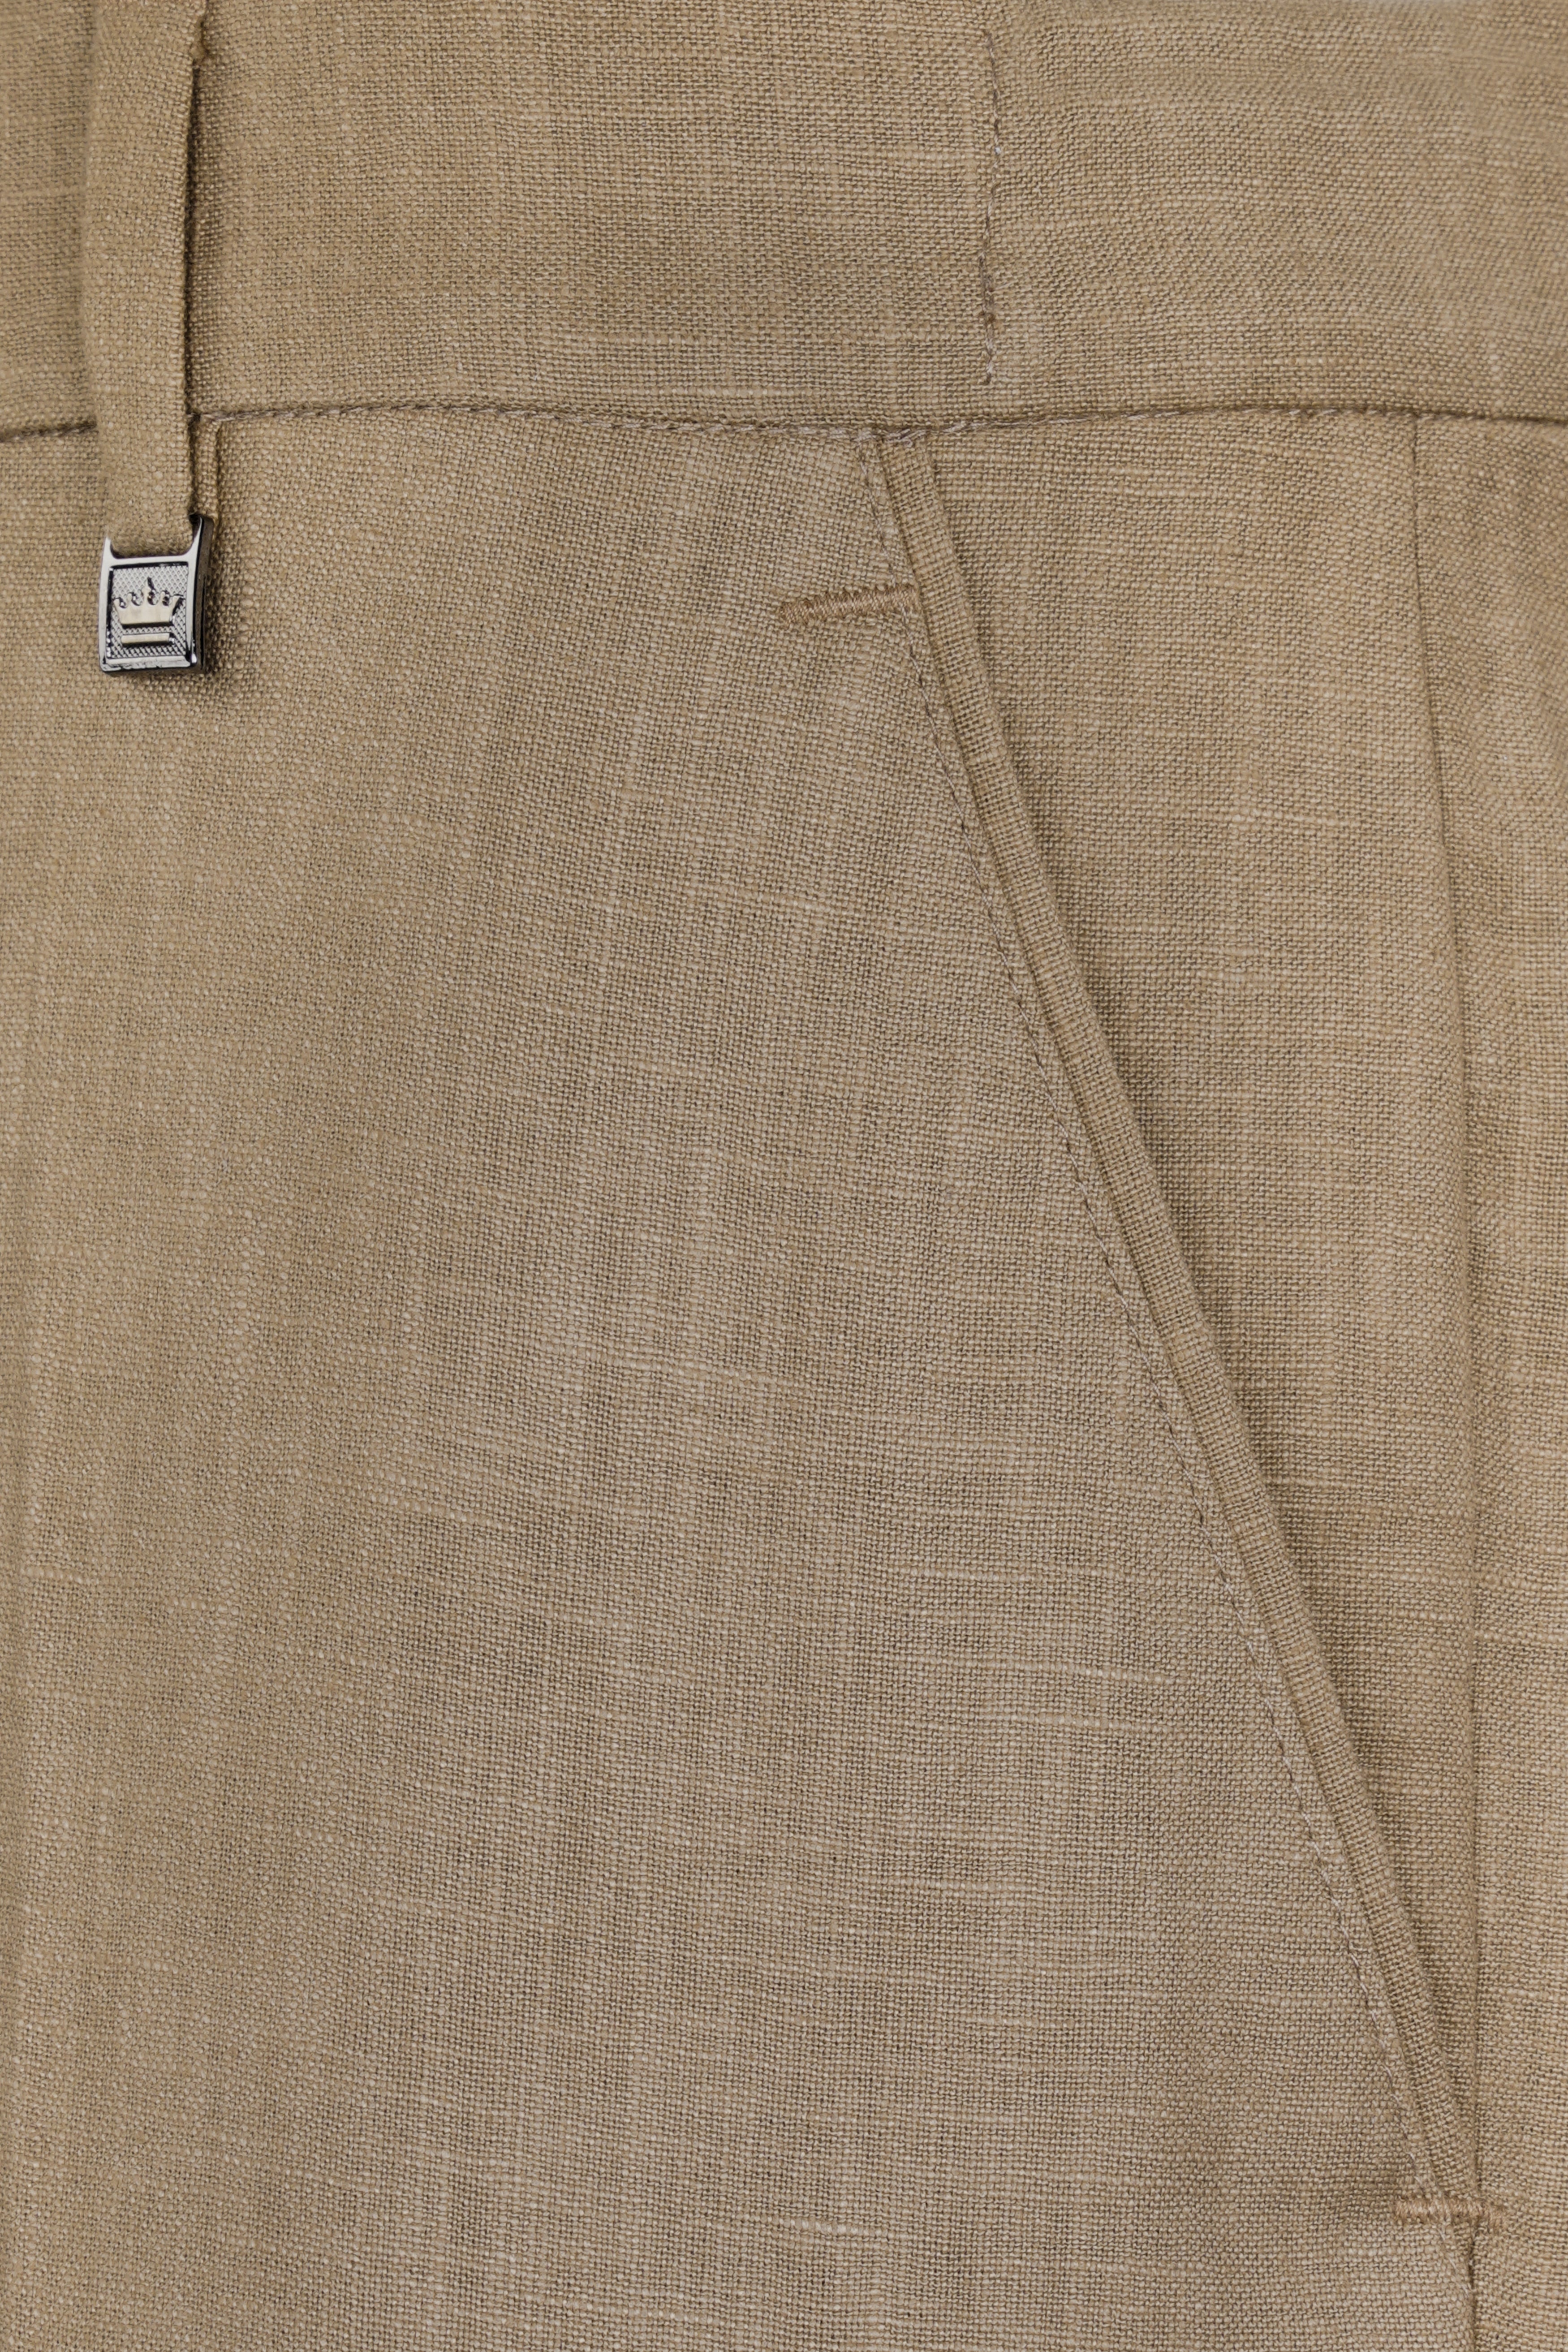 Sandrift Brown Luxurious Linen Double Breasted Sports Suit ST2926-DB-PP-36, ST2926-DB-PP-38, ST2926-DB-PP-40, ST2926-DB-PP-42, ST2926-DB-PP-44, ST2926-DB-PP-46, ST2926-DB-PP-48, ST2926-DB-PP-50, ST2926-DB-PP-52, ST2926-DB-PP-54, ST2926-DB-PP-56, ST2926-DB-PP-58, ST2926-DB-PP-60